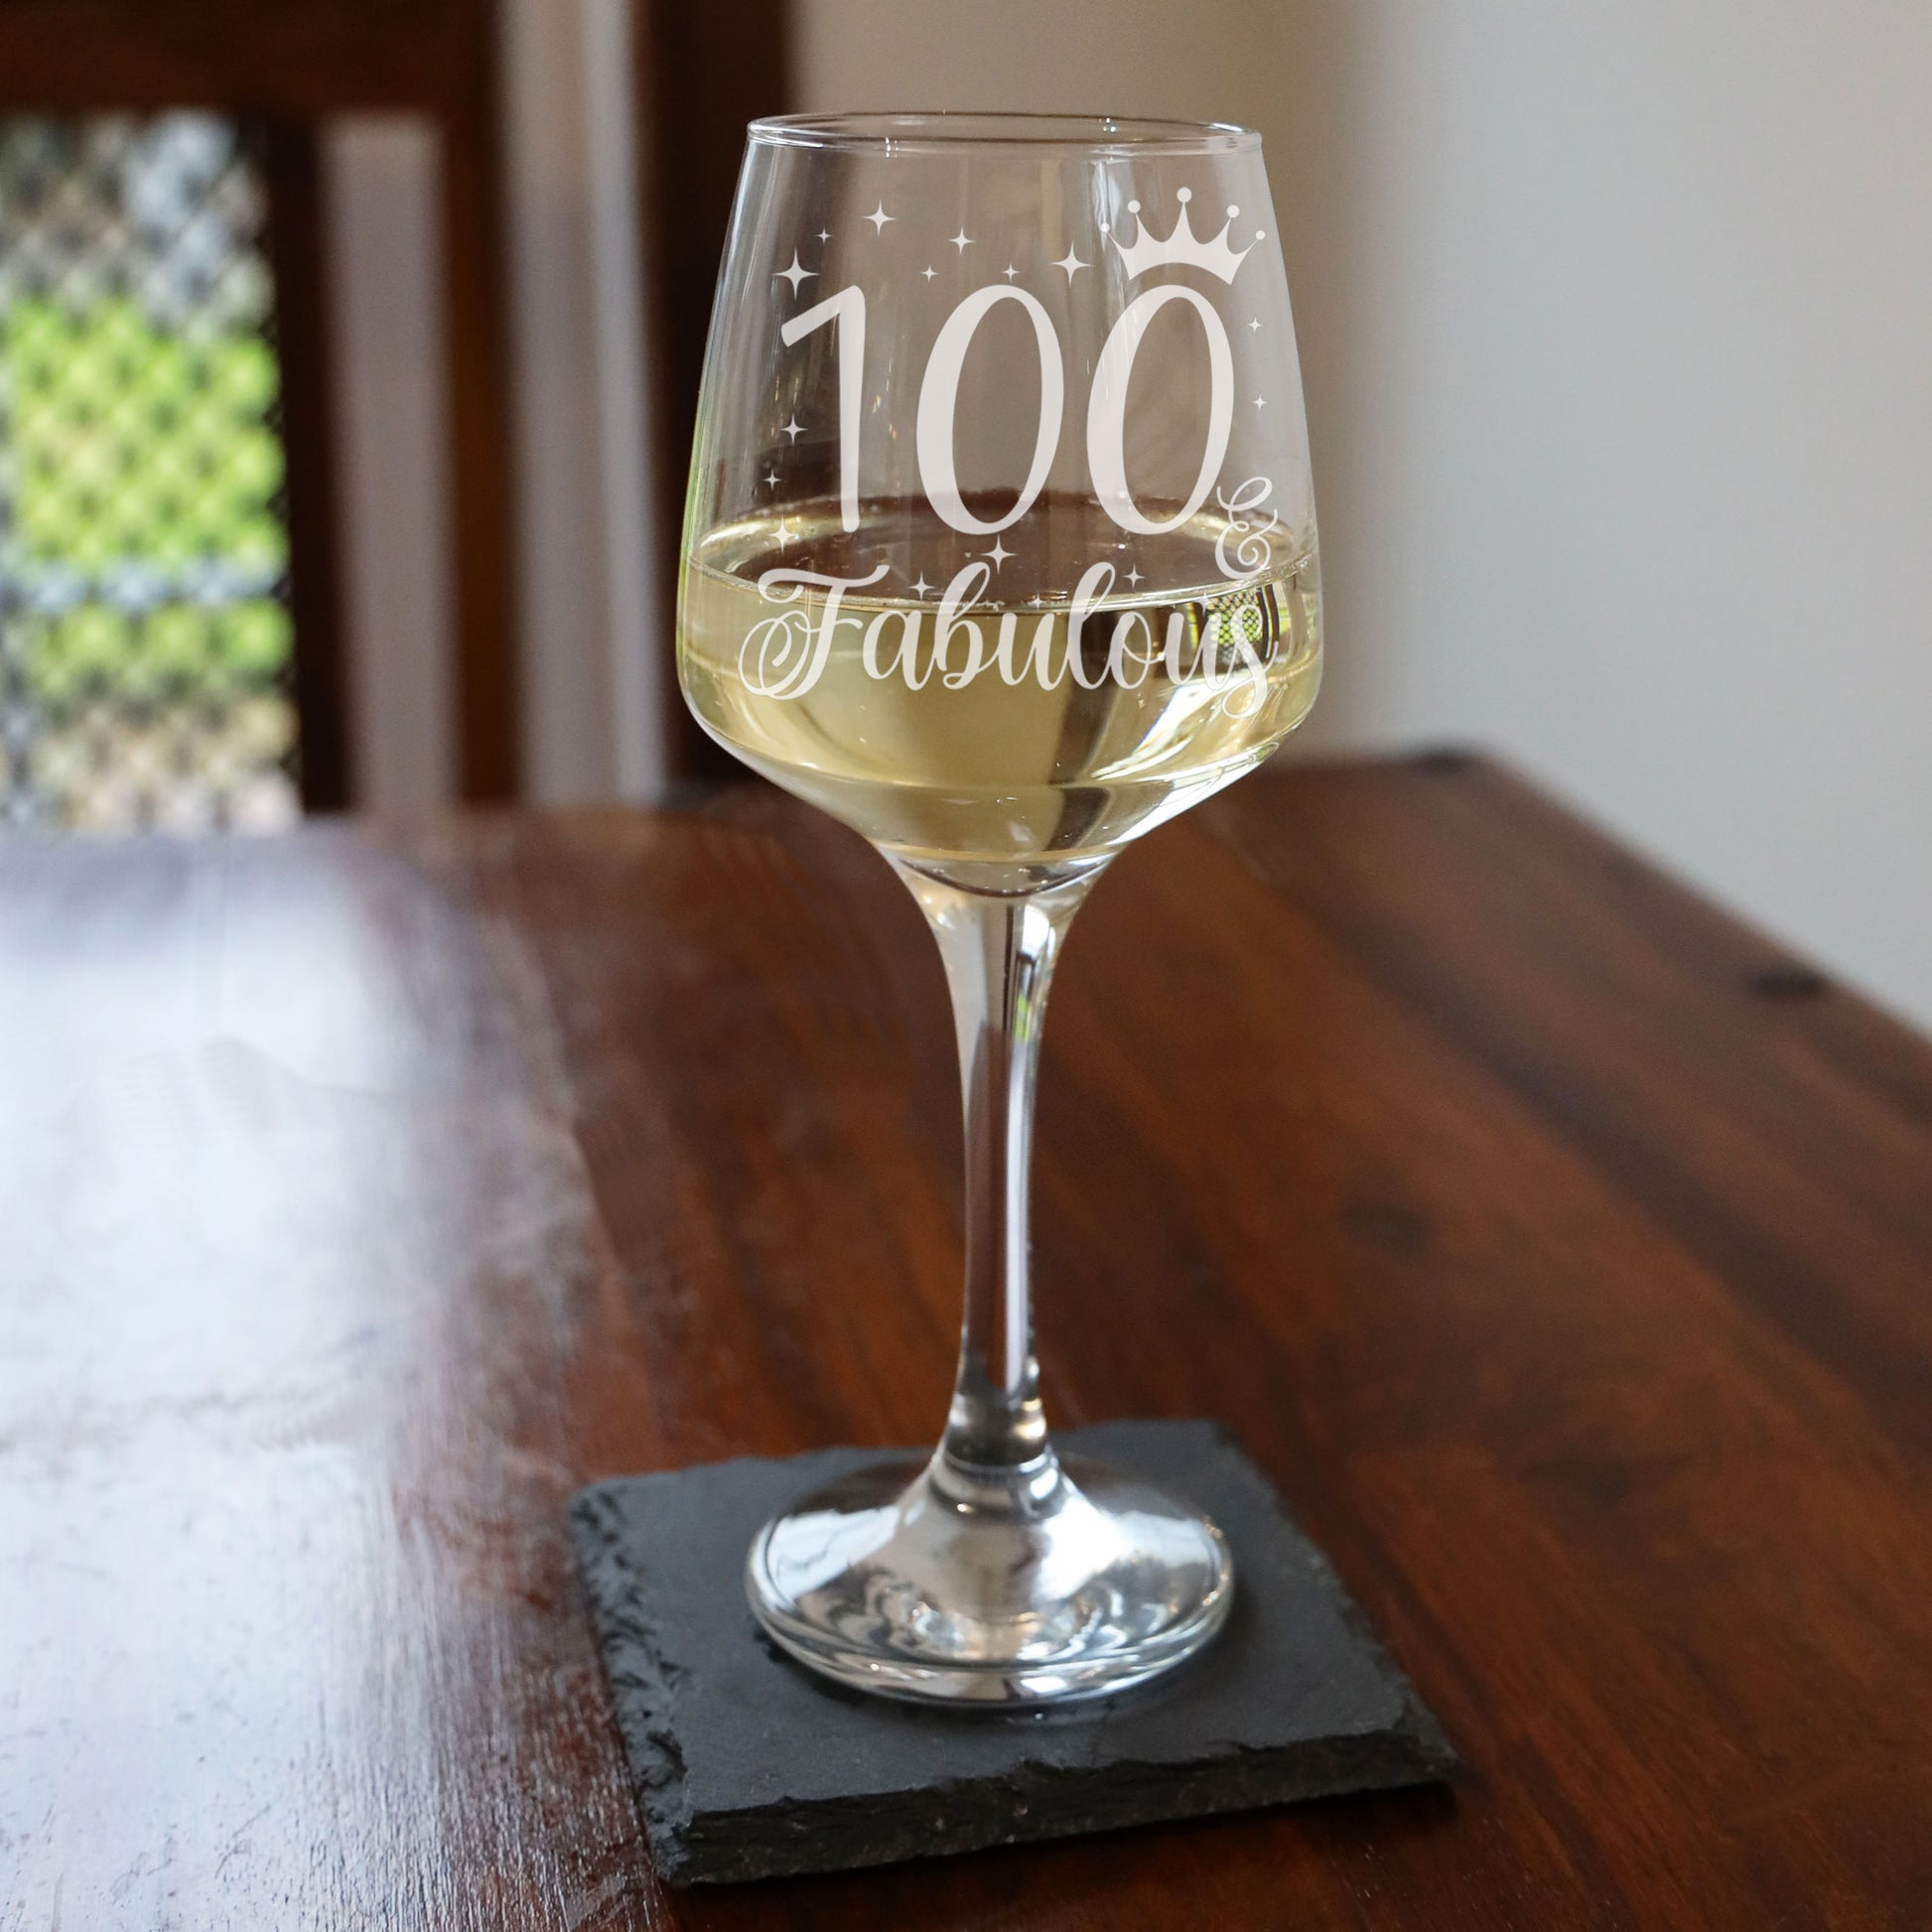 100 & Fabulous 100th Birthday Gift Engraved Wine Glass and/or Coaster Set  - Always Looking Good - Wine Glass Only  